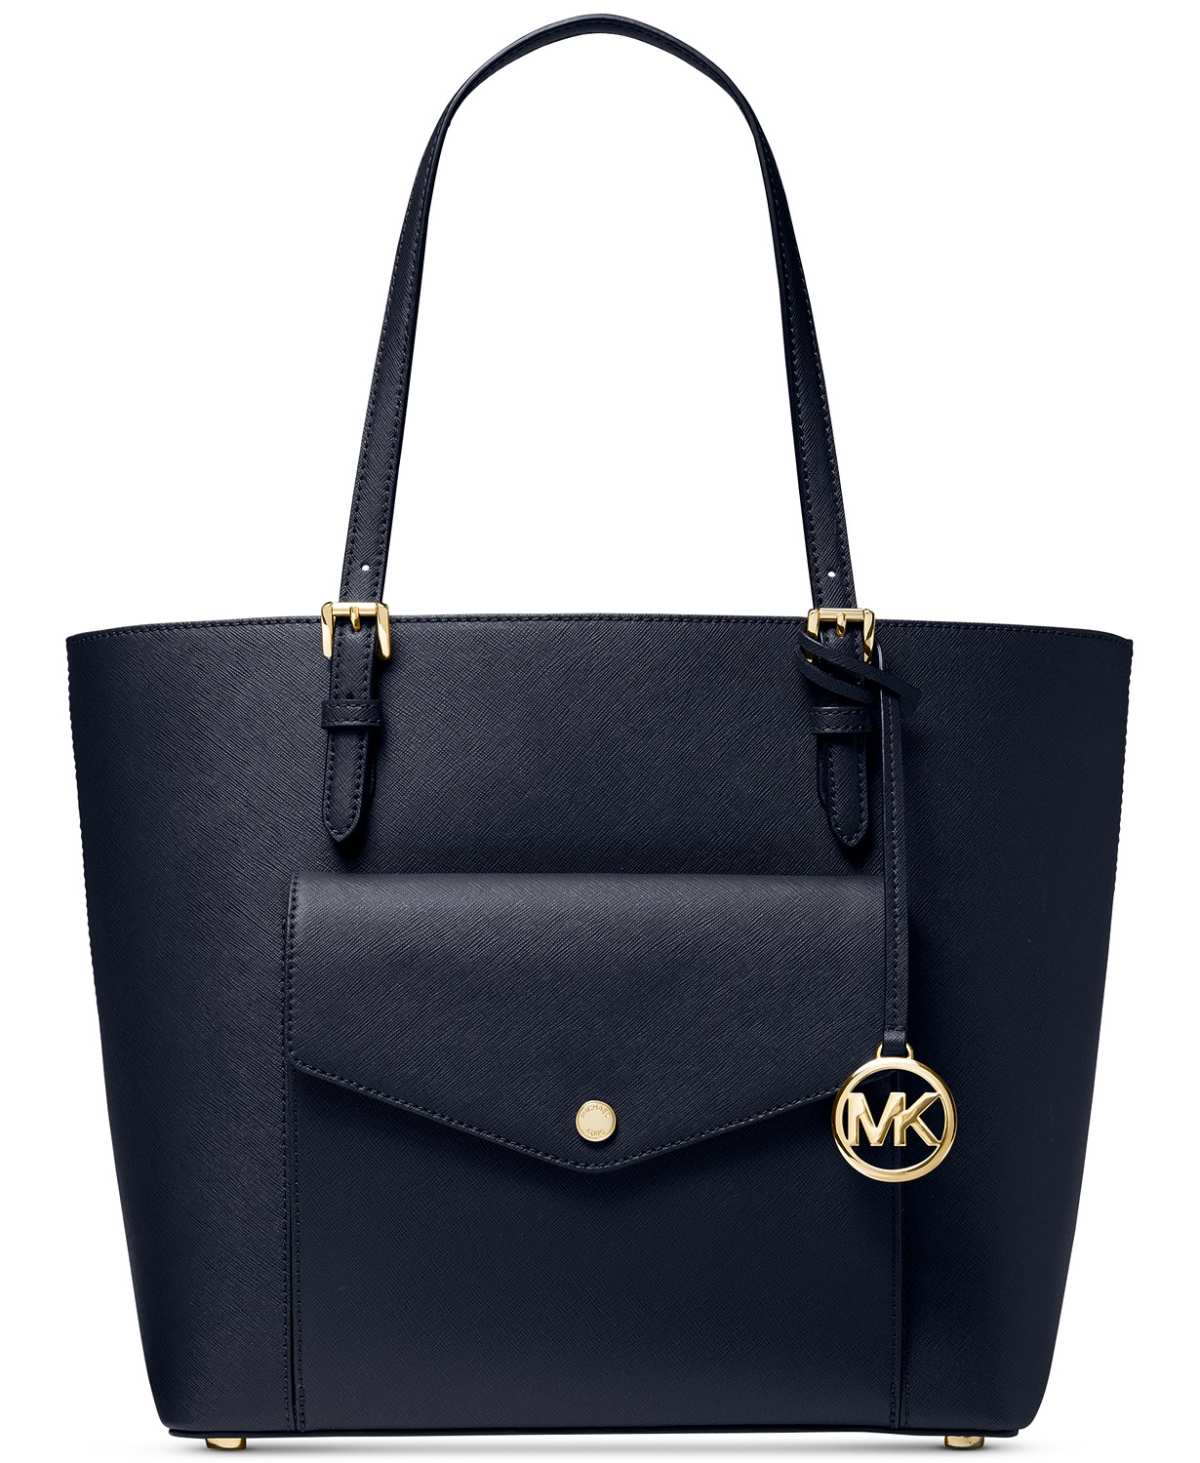 Michael Kors Handbags Are Up to 60% Off at Macy’s Right Now